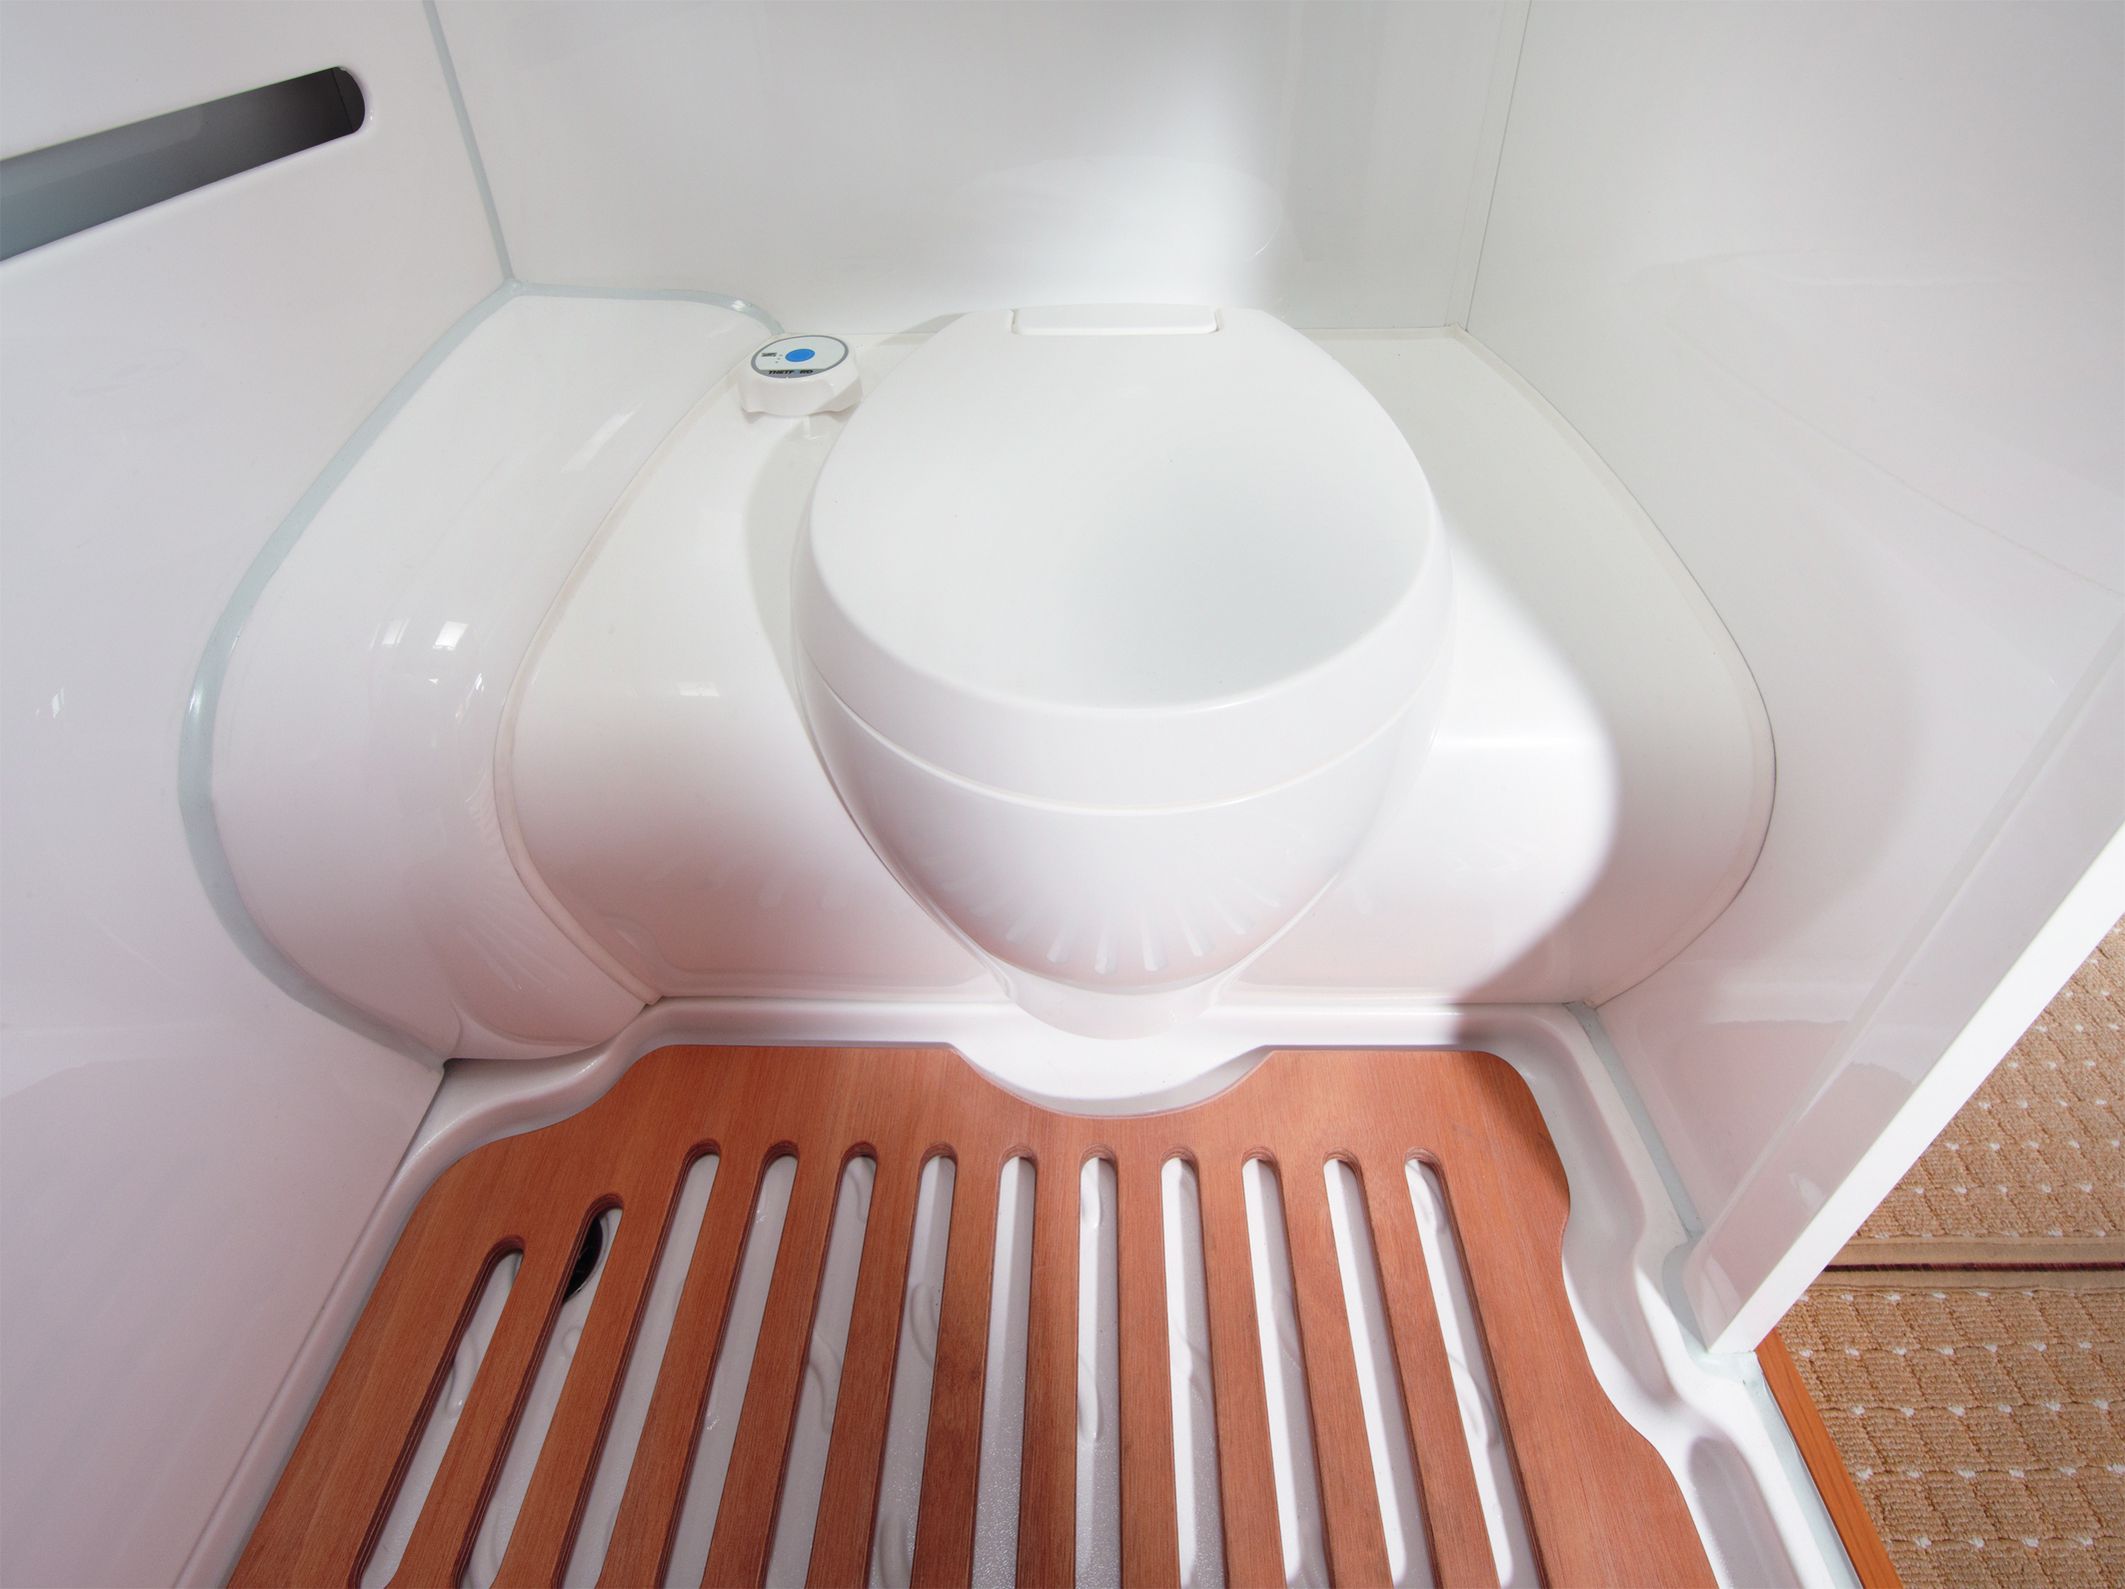 Toilet in camping vehicles – main image